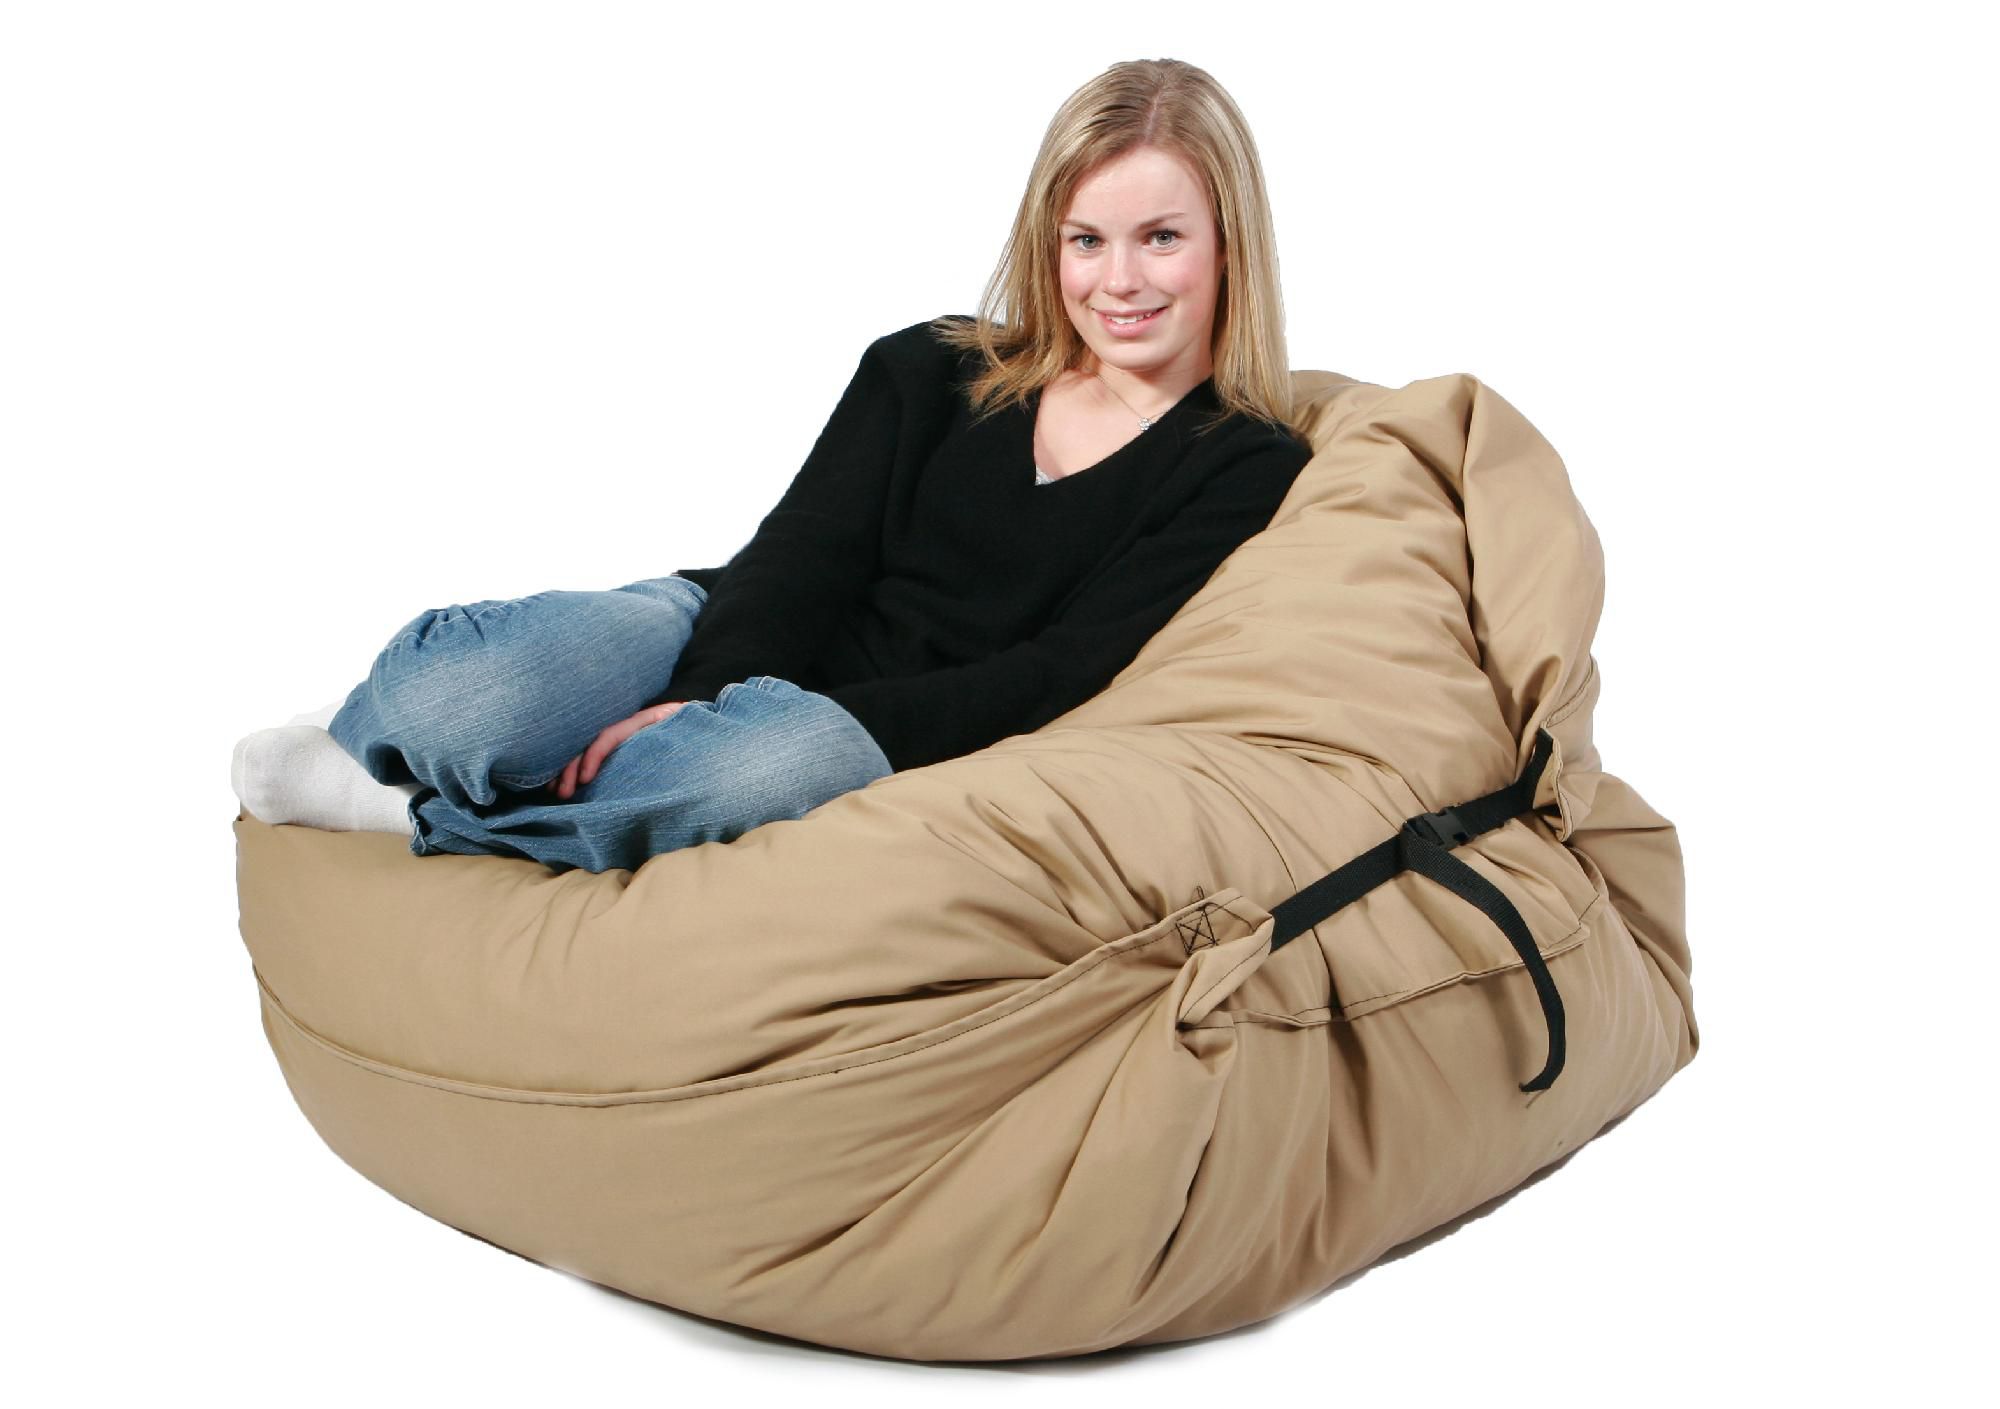 Comfort Research Relax Fuf Lounger